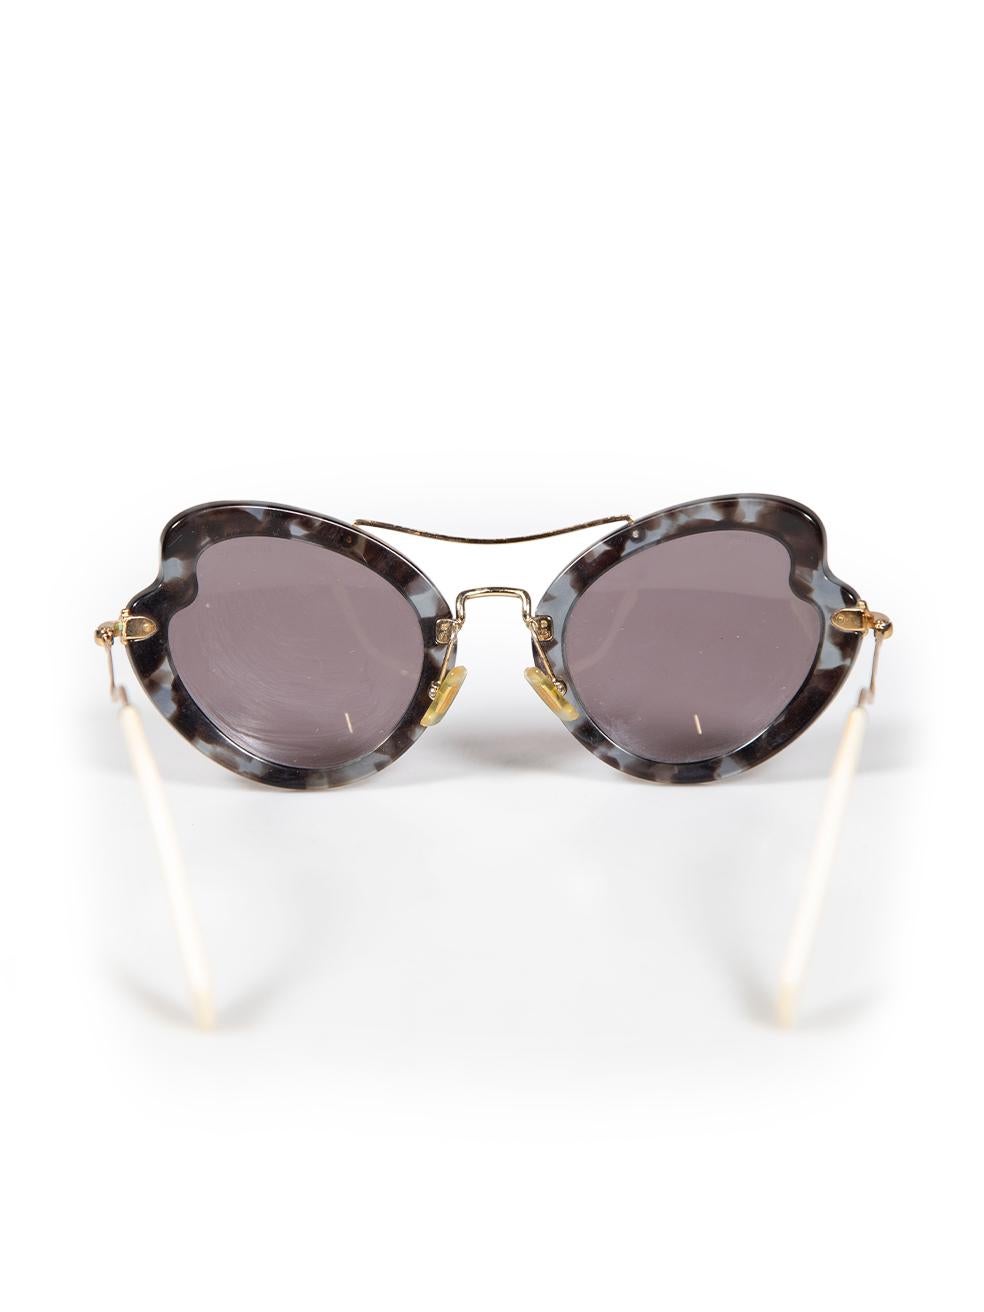 Miu Miu Grey Tortoise Shell Cat Eye Sunglasses In Good Condition For Sale In London, GB